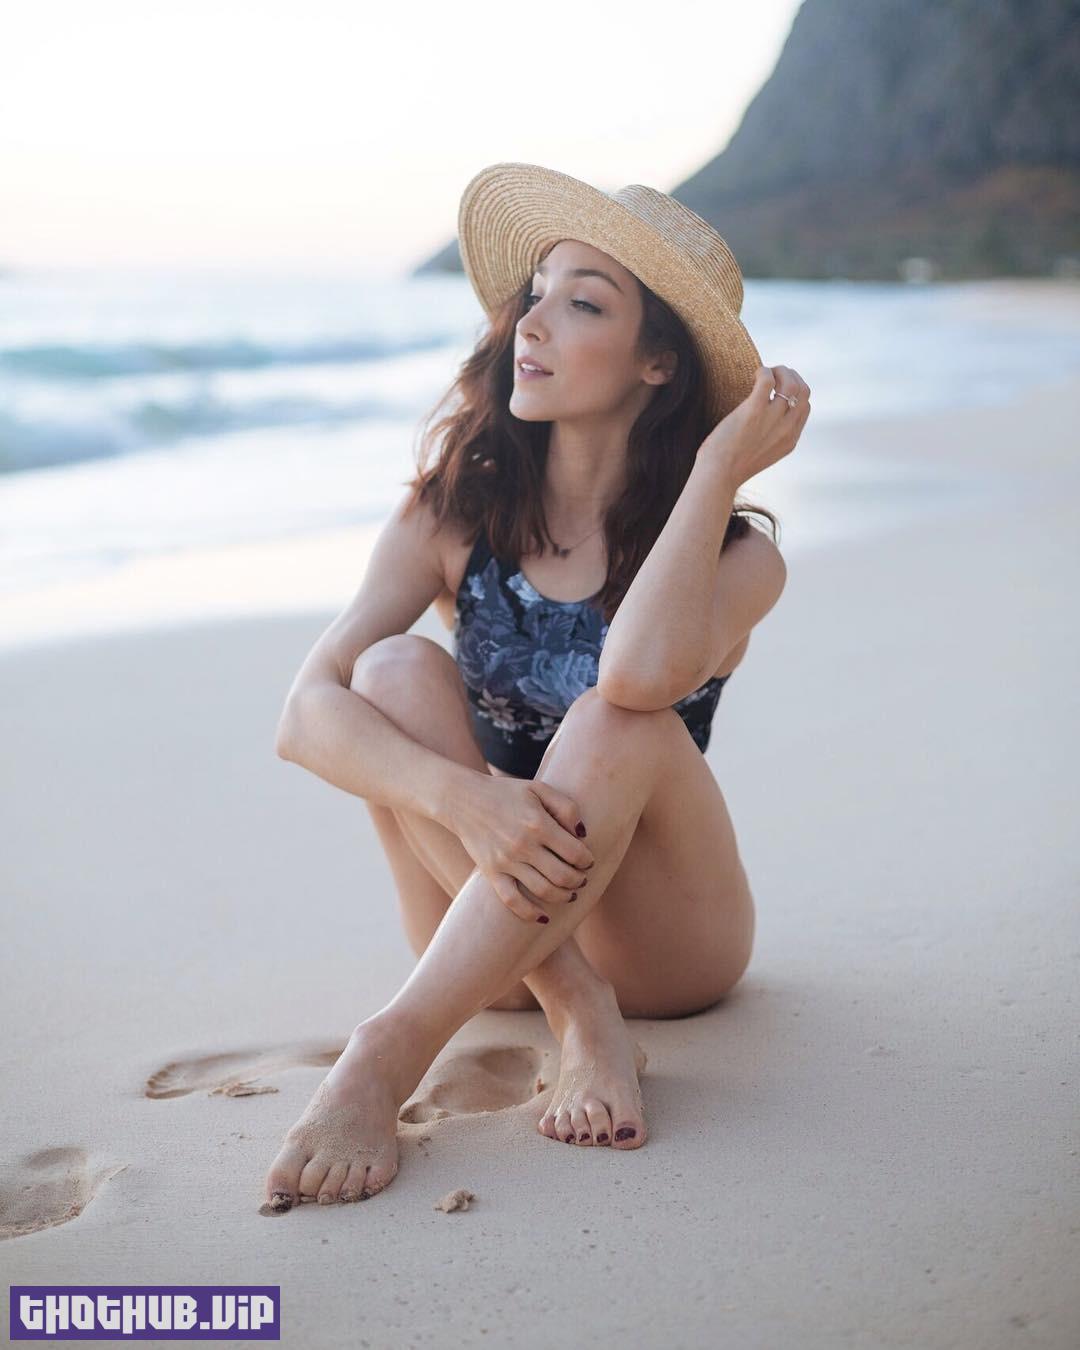 1686845027 355 Meryl Davis Fappening Collection 2019 35 Photos And Video